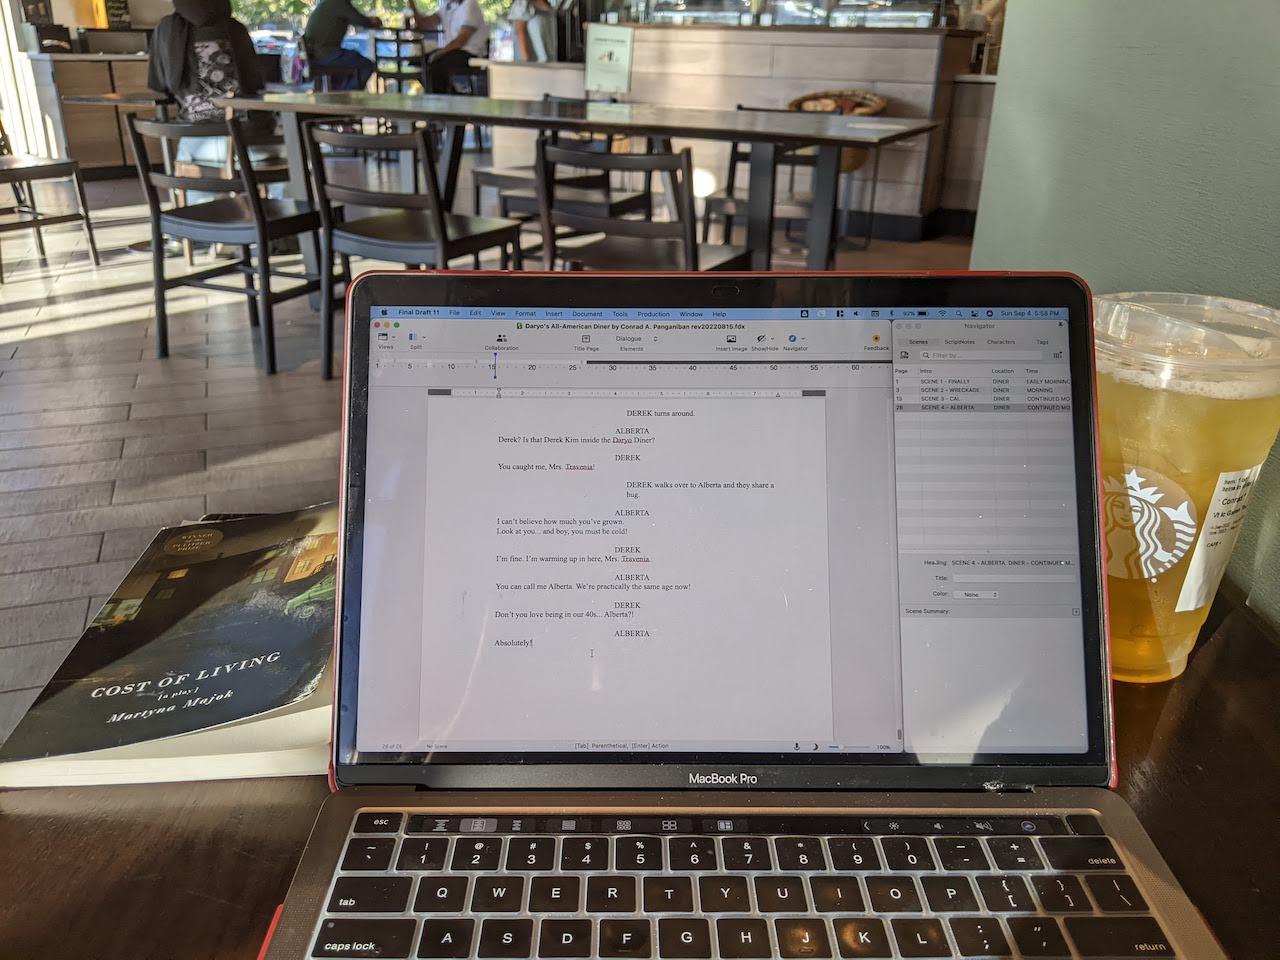 Pictured: a photo of a laptop with a script written in Final Draft in a Starbucks Coffee Shop.